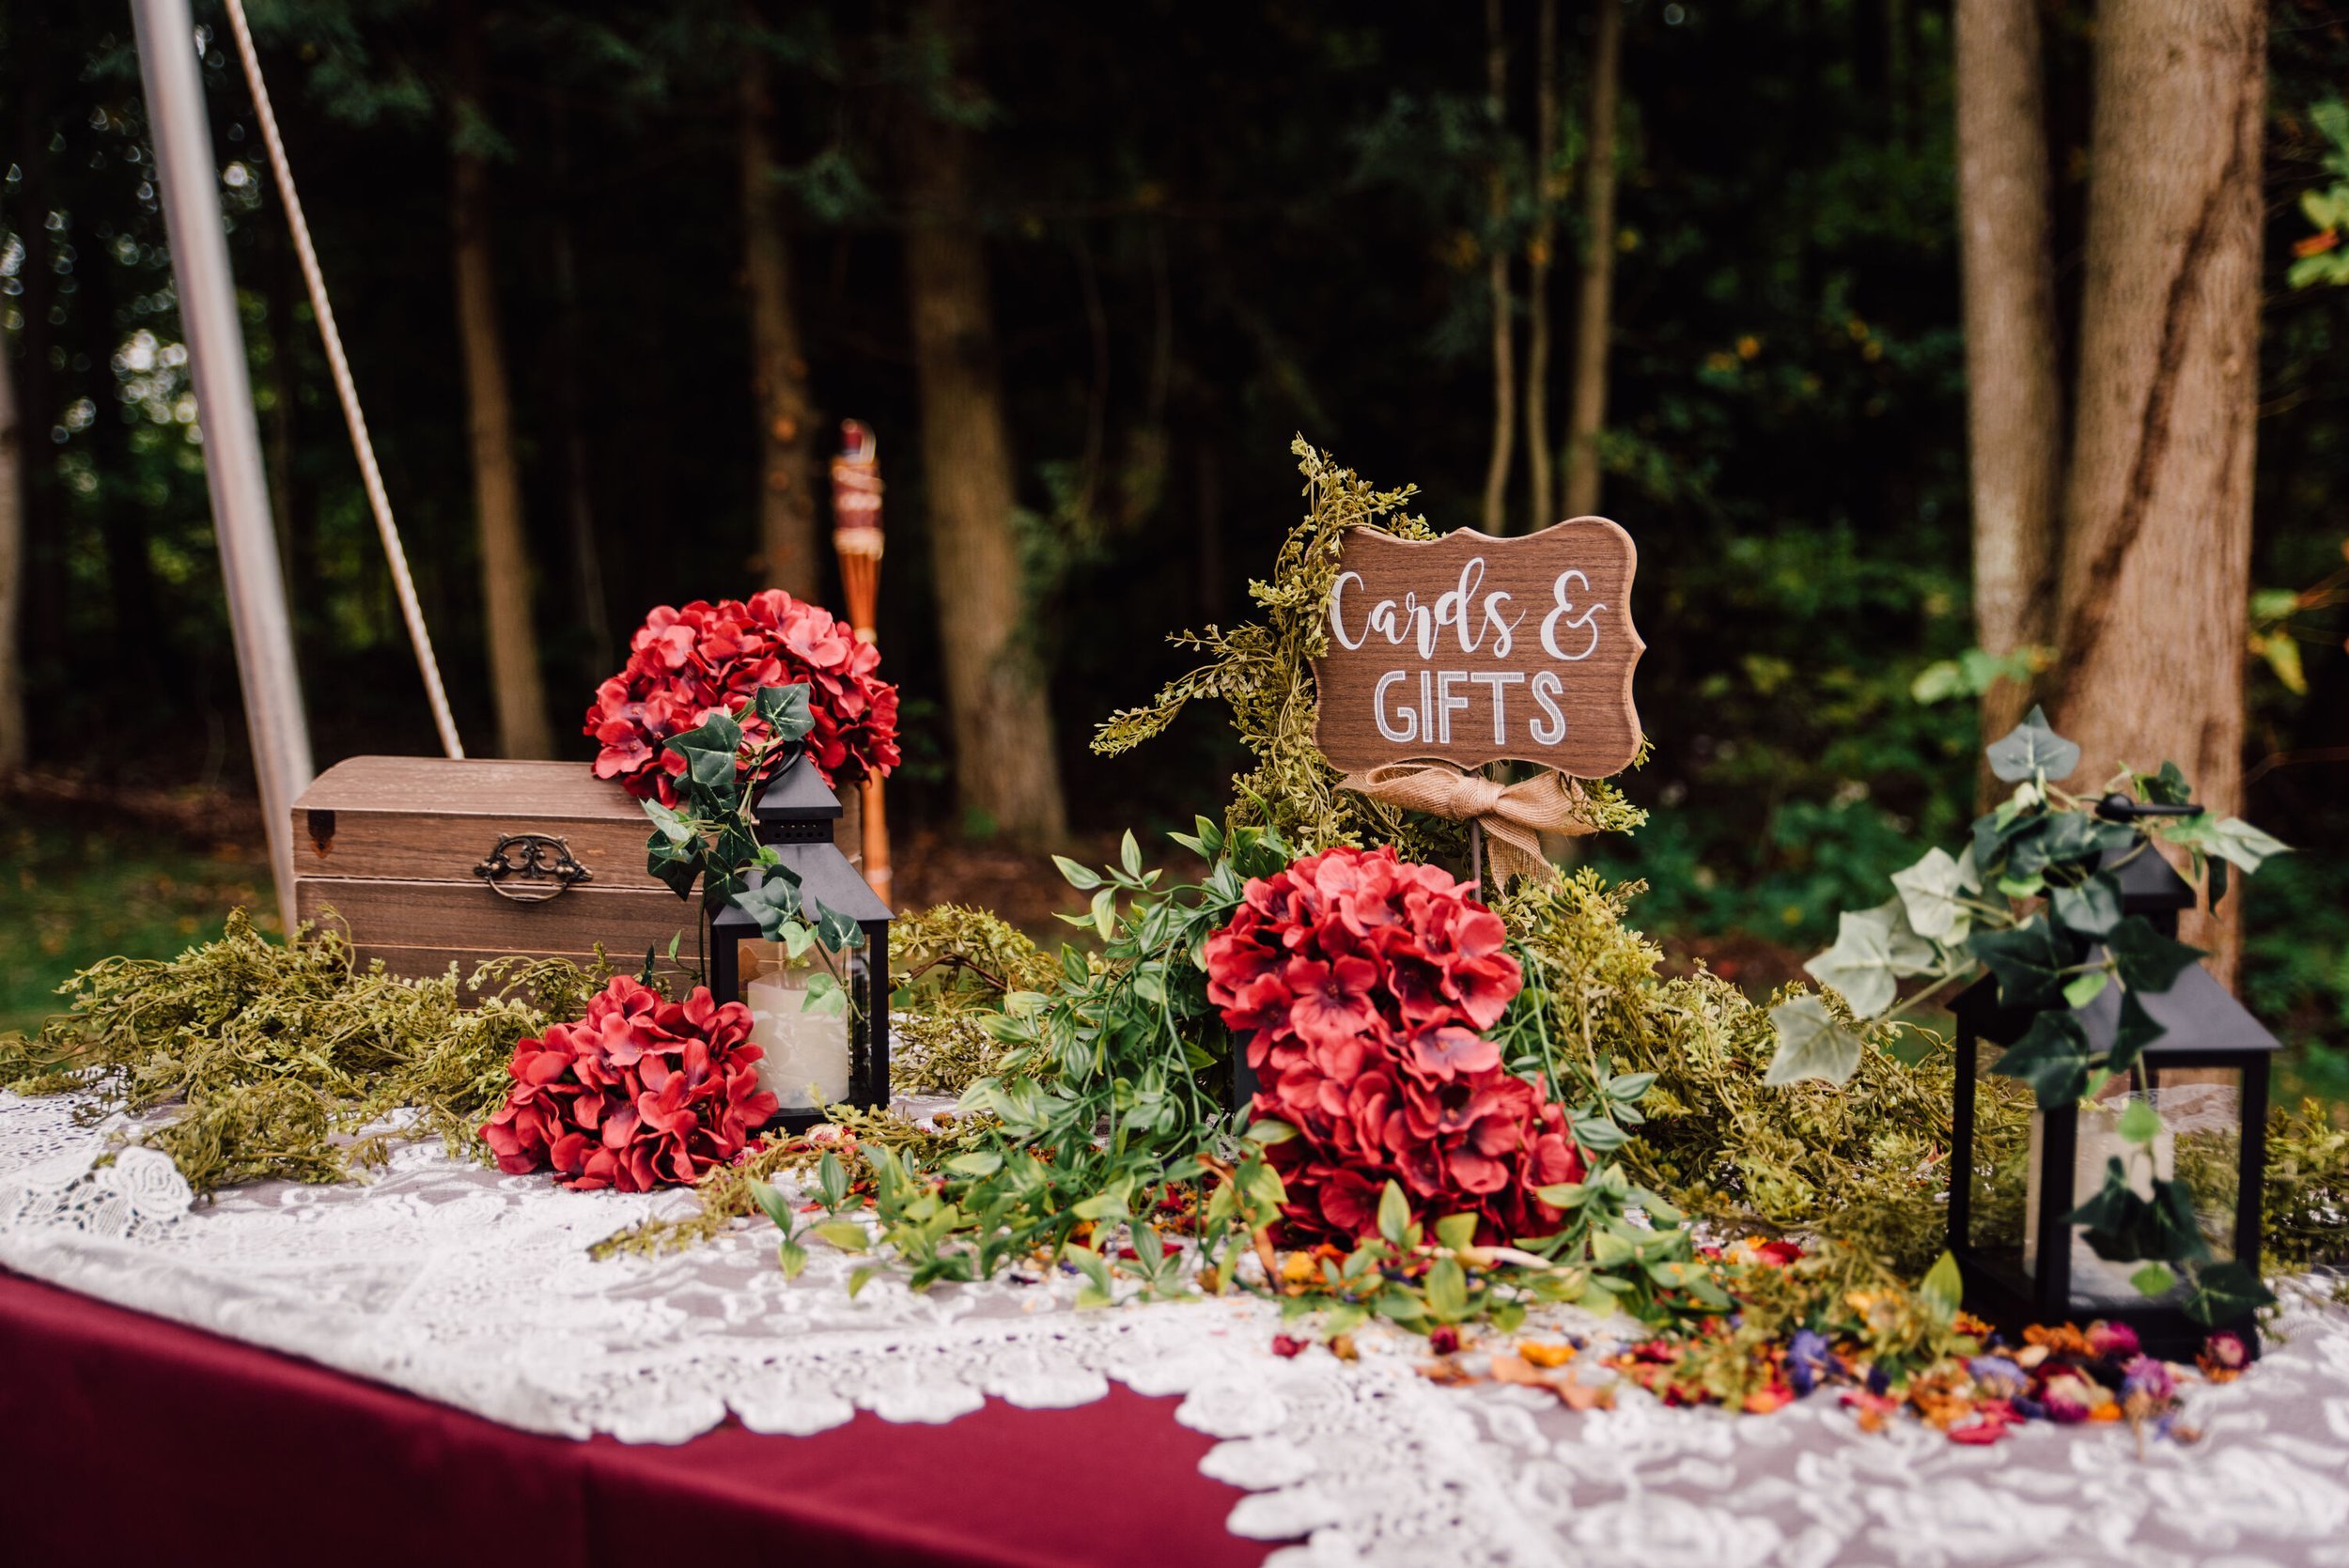  A cards and gifts table is decorated as part of the backyard wedding decor 